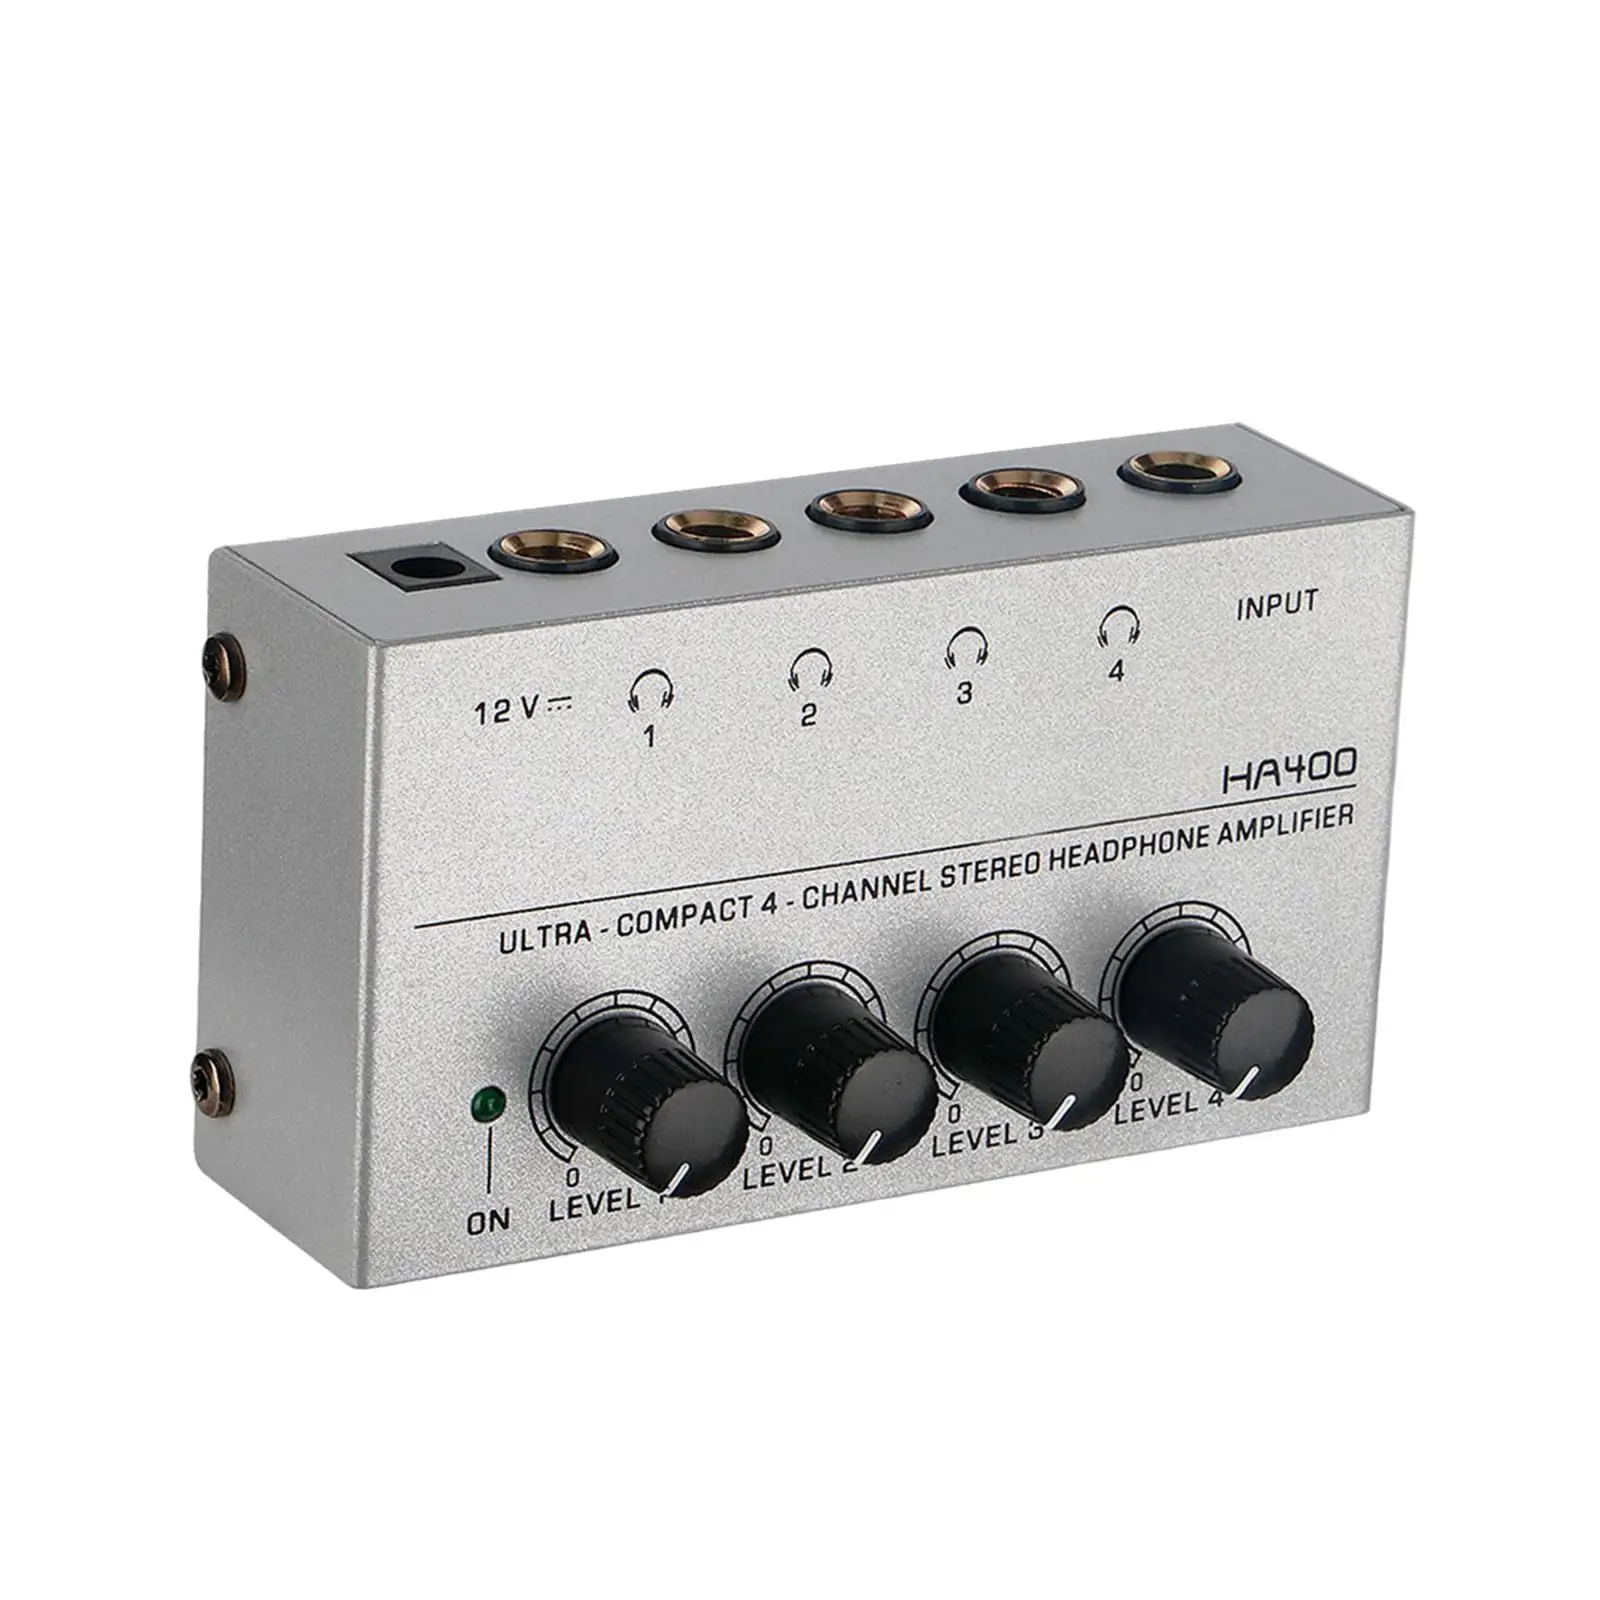 4 Output Headphone amp Mixer Loudspeaker Clear Sound Professional Low Noise Stereo for music Stage Performances